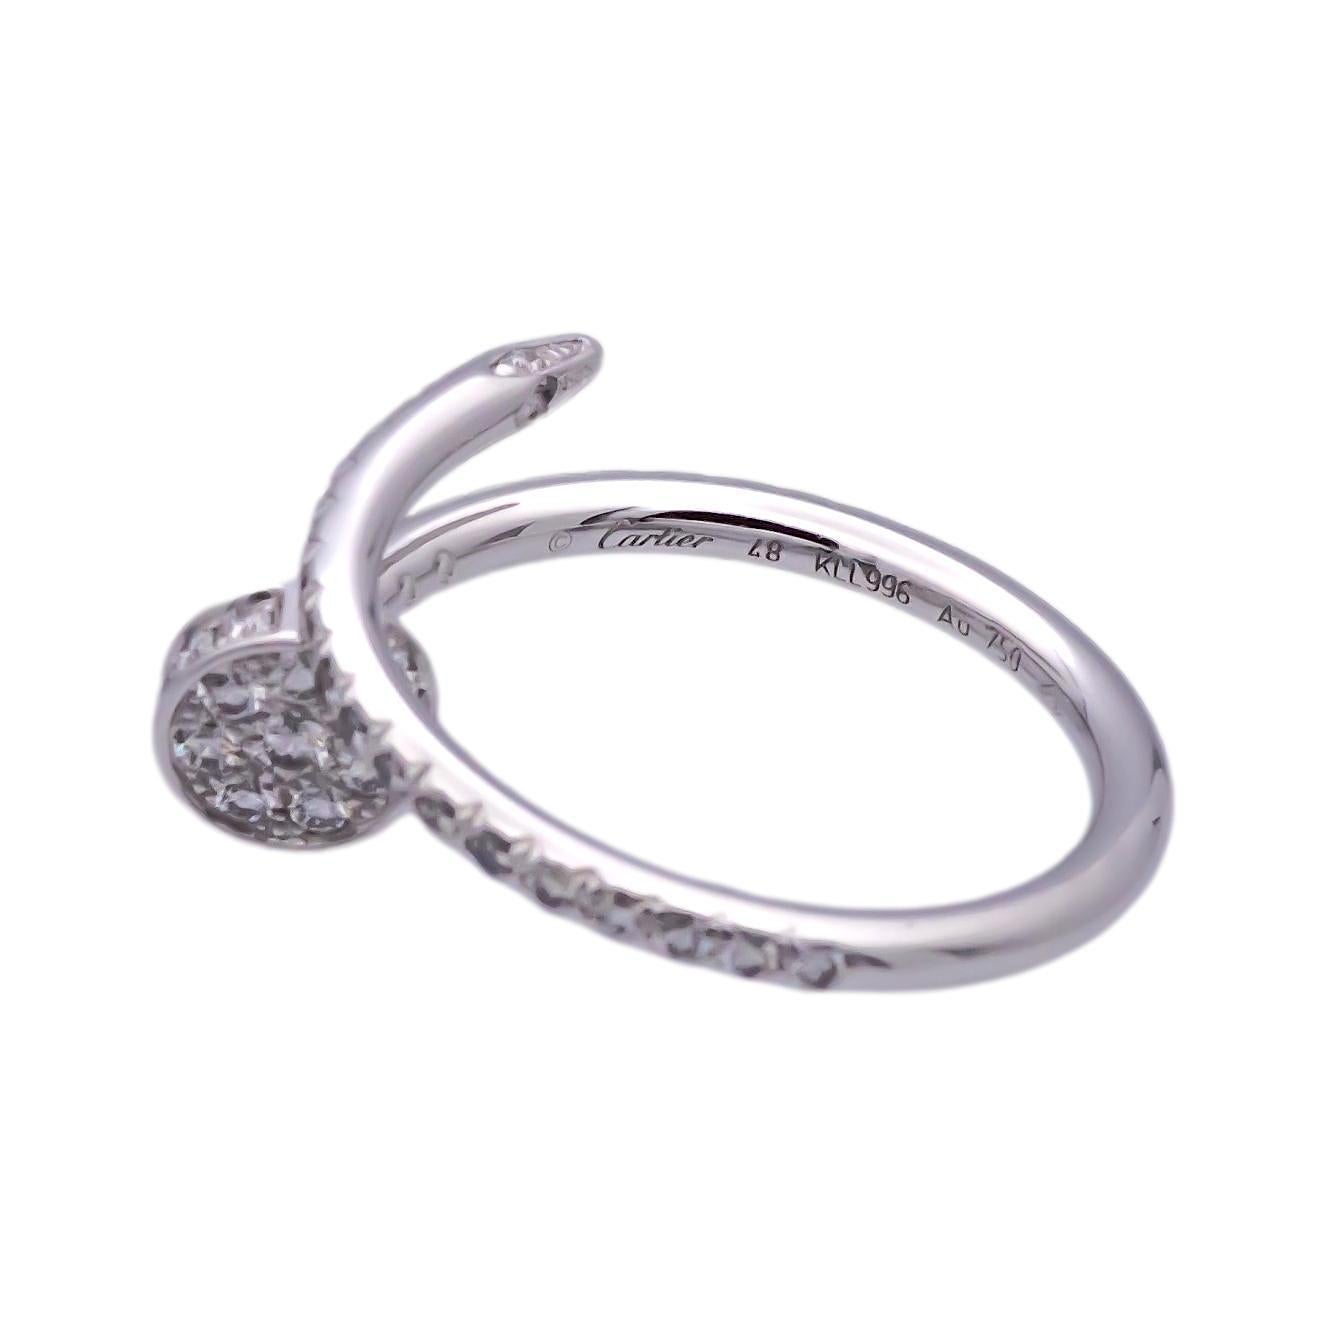 Cartier Juste Un Clou 18K White Gold Pave Diamond Ring Size EU48/US4.5 In Excellent Condition For Sale In New York, NY